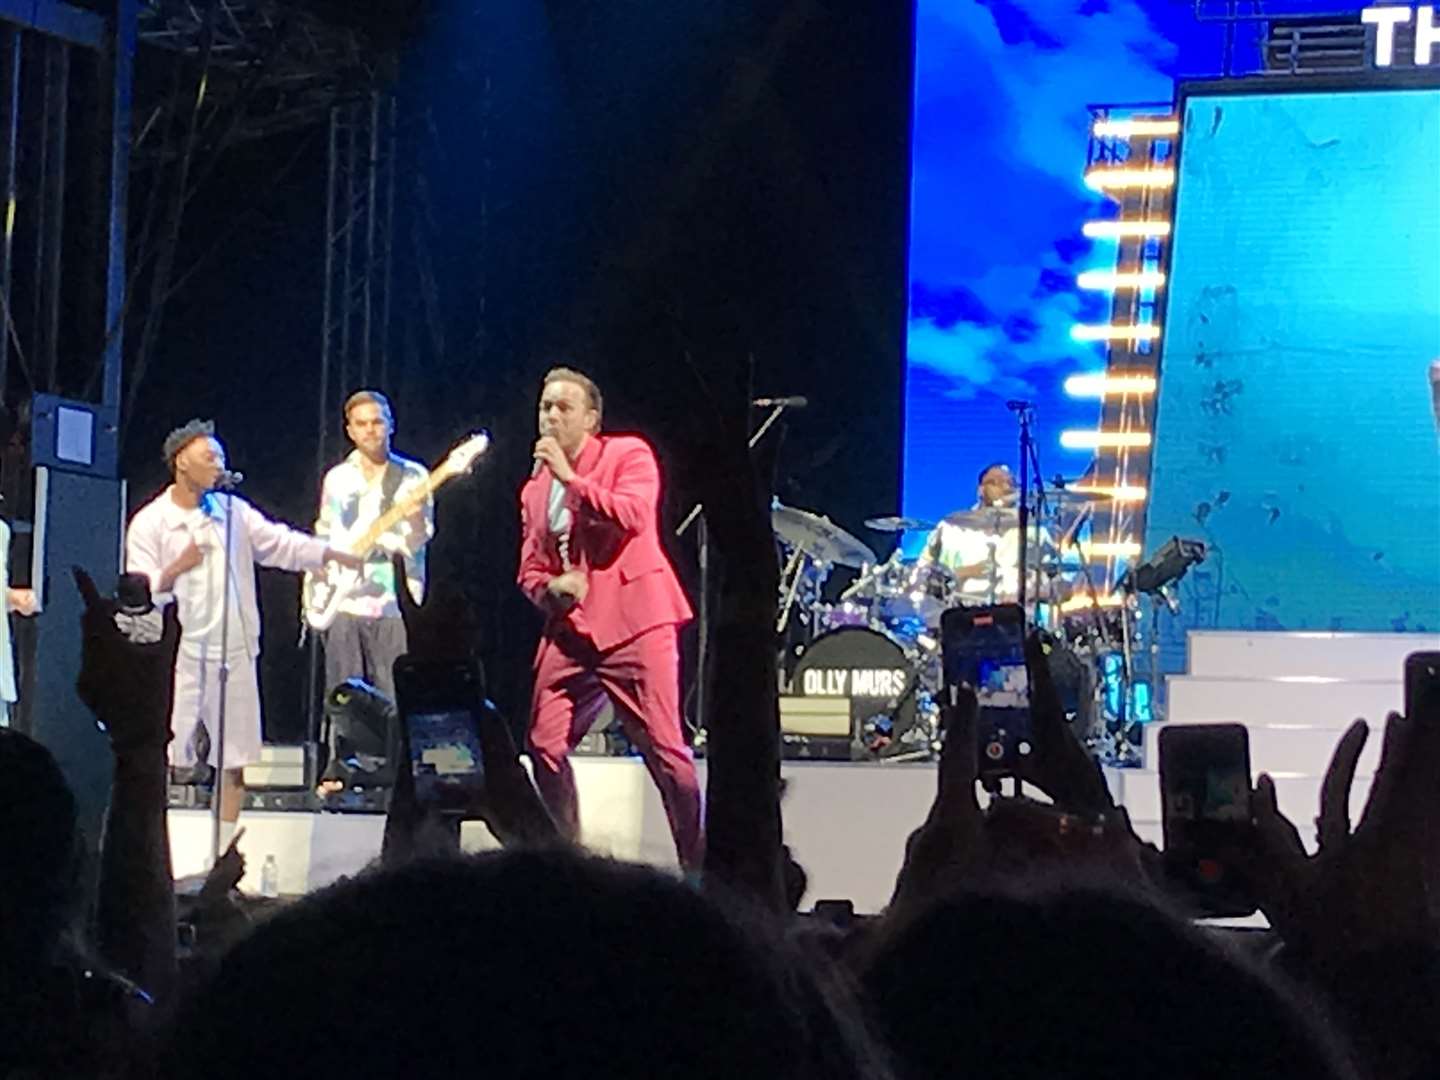 Olly Murs performing at the Hop Farm last night